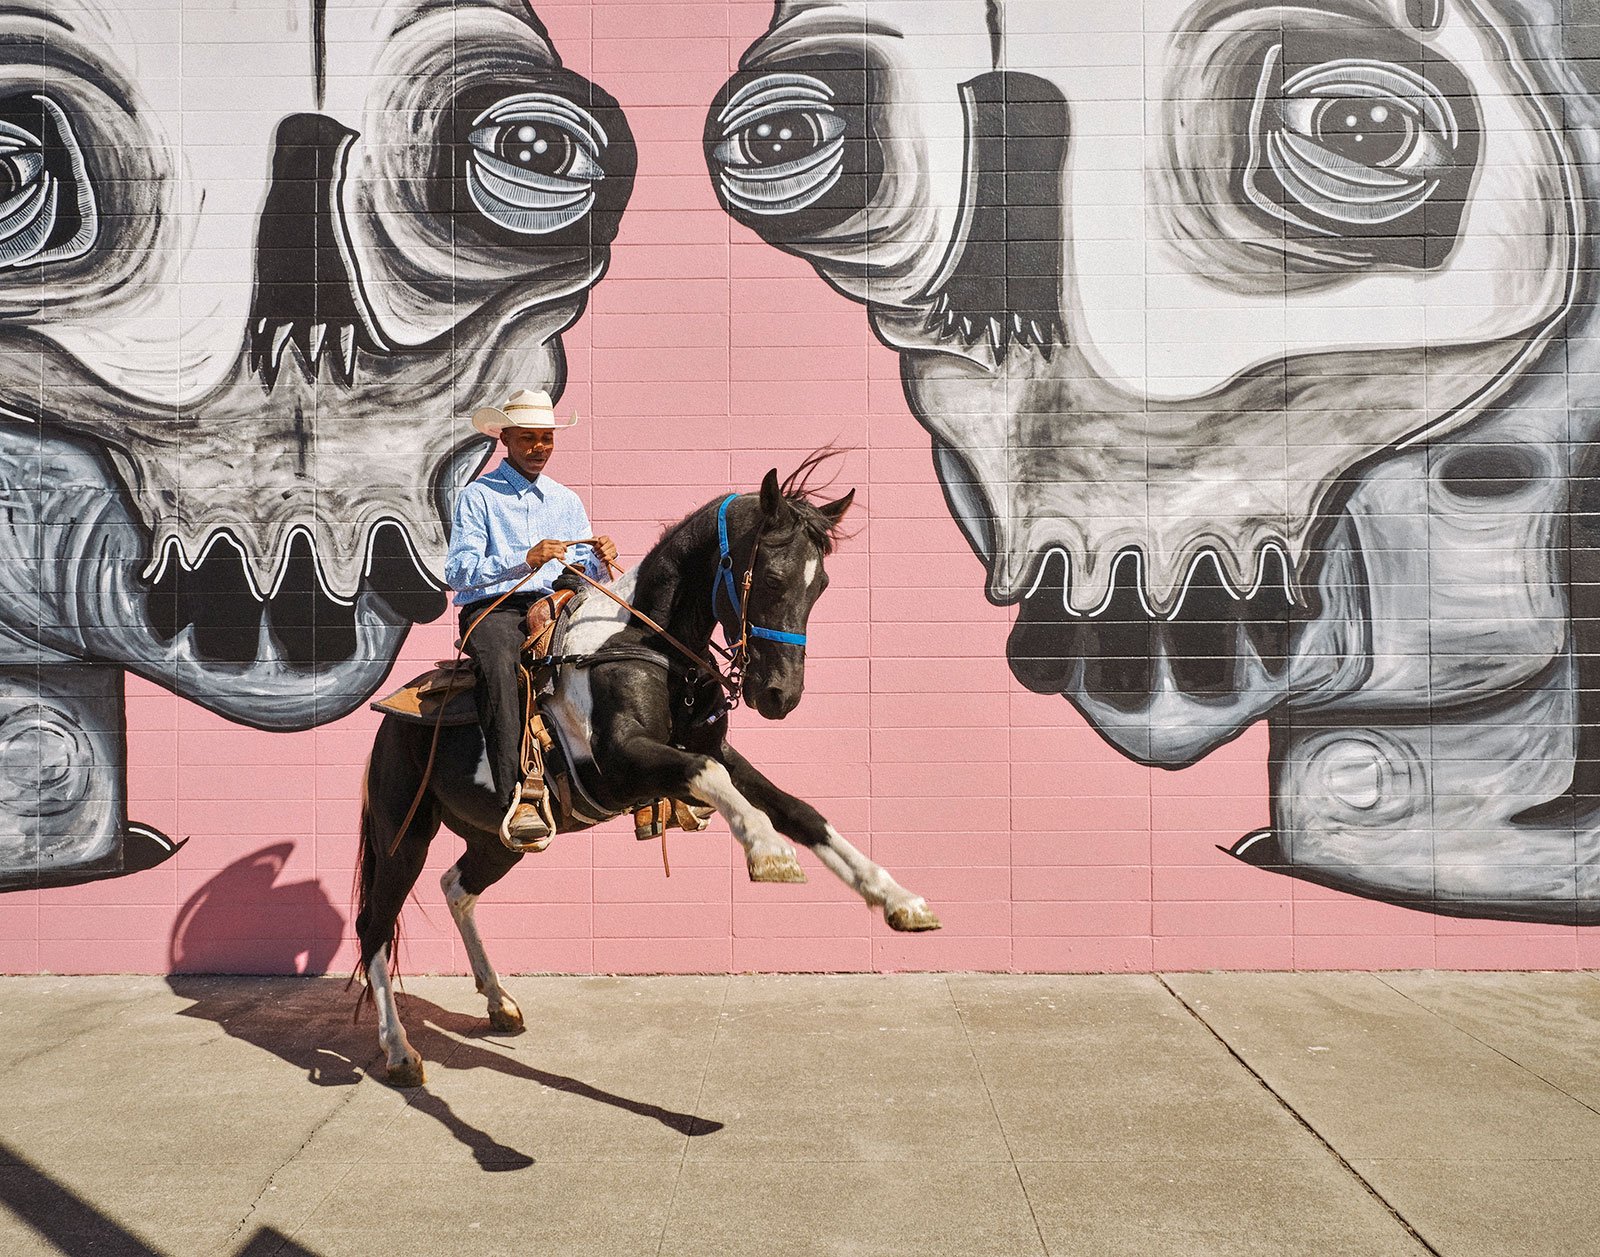 man riding horse with a mural behind him